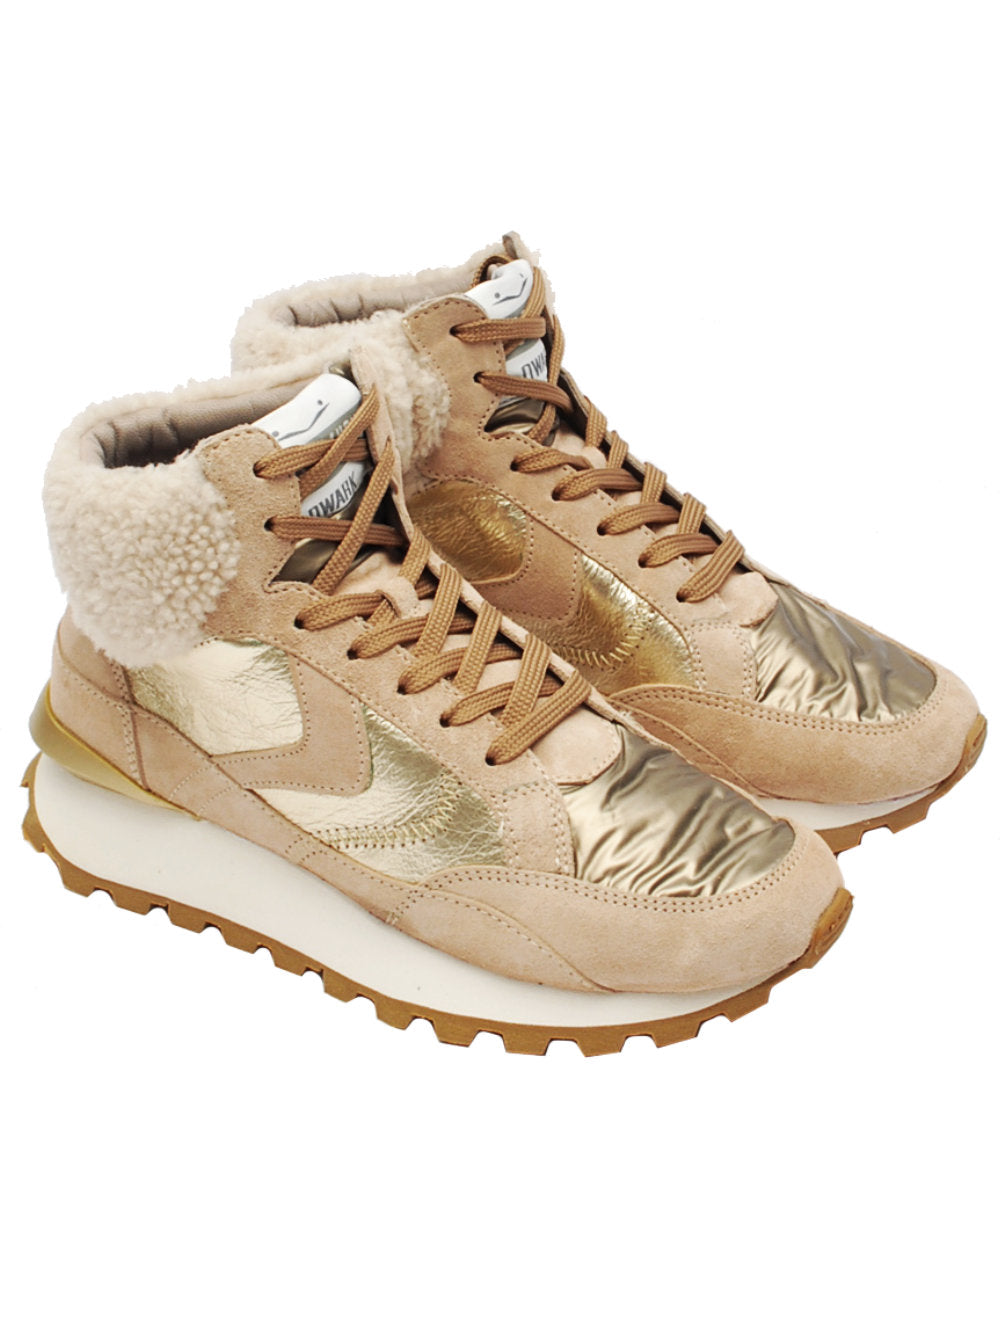 Voile blanche sneakers qwark high 2275 beige oro ai23